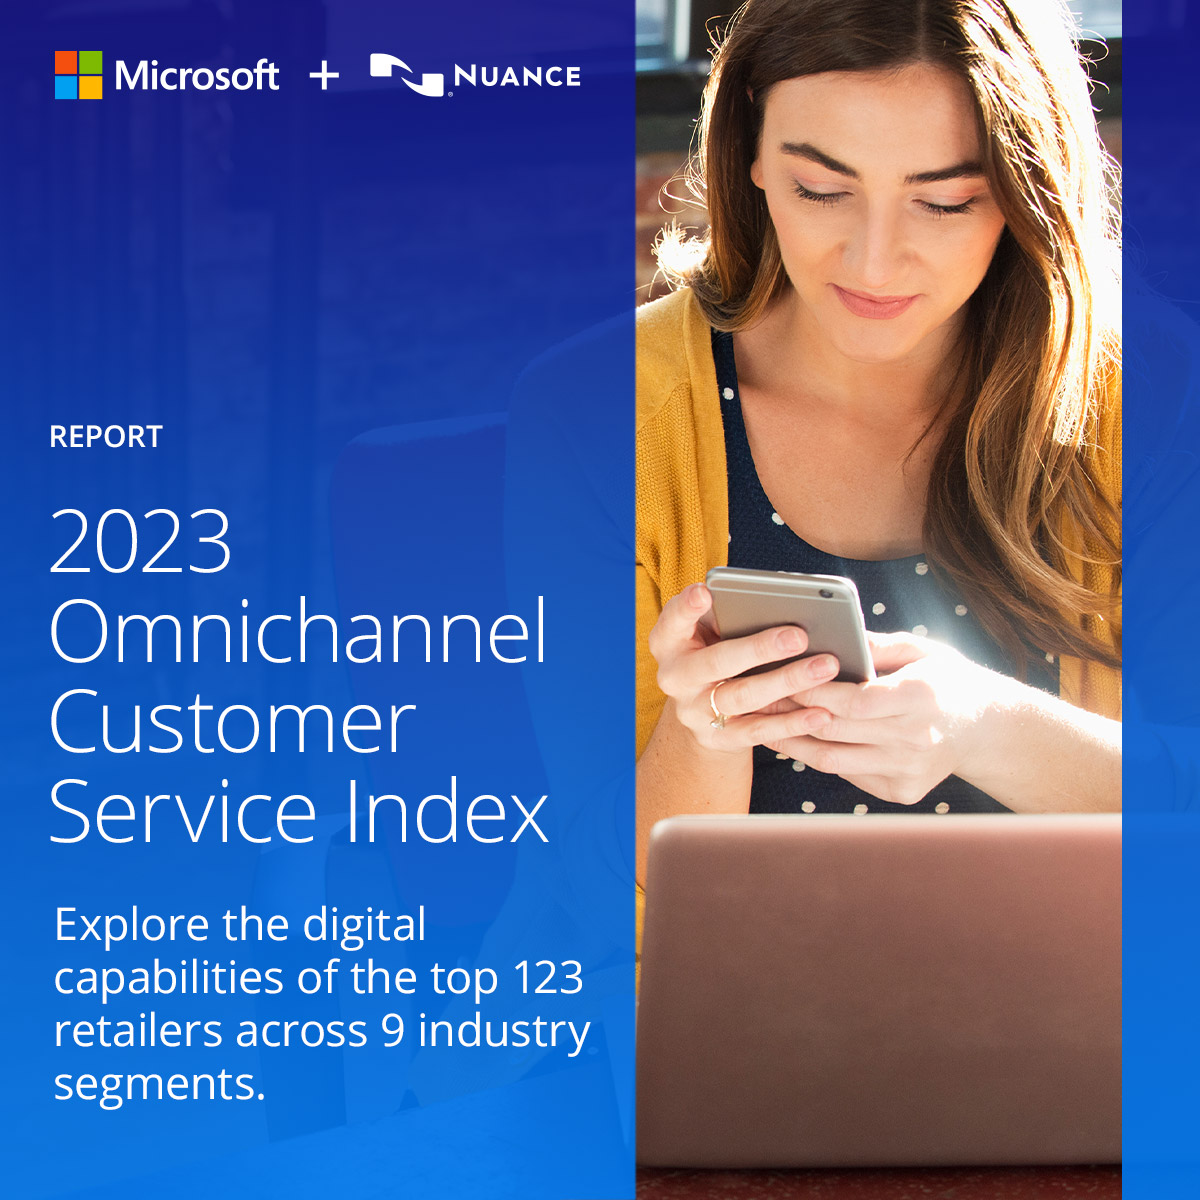 Customer engagement & service are key to shopper retention and driving lifetime value. Brands must offer multiple channels for shopper assistance & speed of issue resolution. 

#CustomerService #CustomerEngagement #OmnichannelRetail #RetailExperience